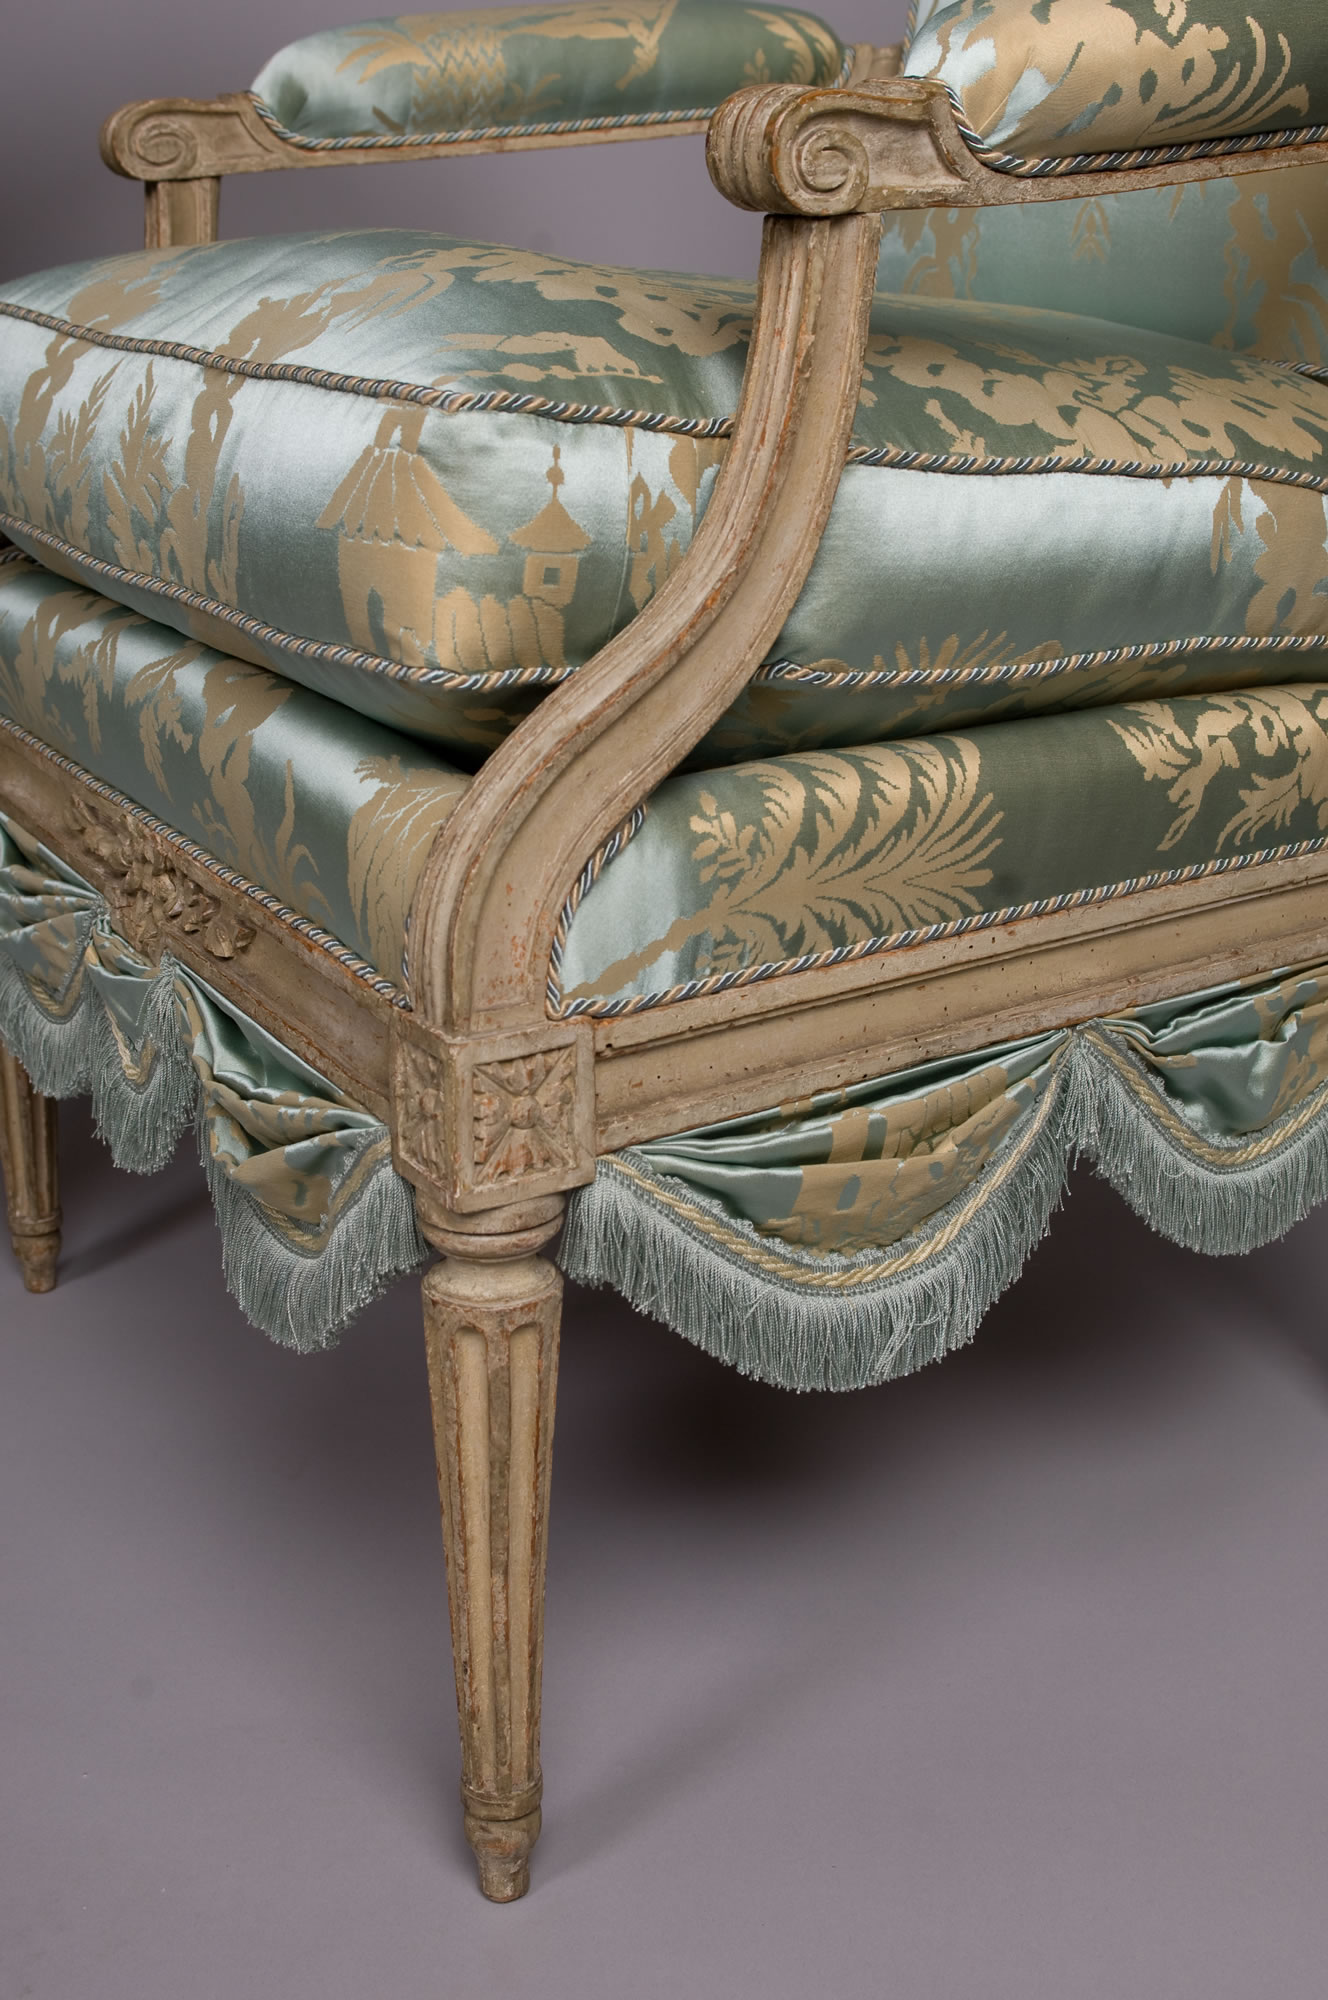 French Louis XVI Period, Painted, Beechwood Fauteuils attributed to, “C. SÉNÉ”